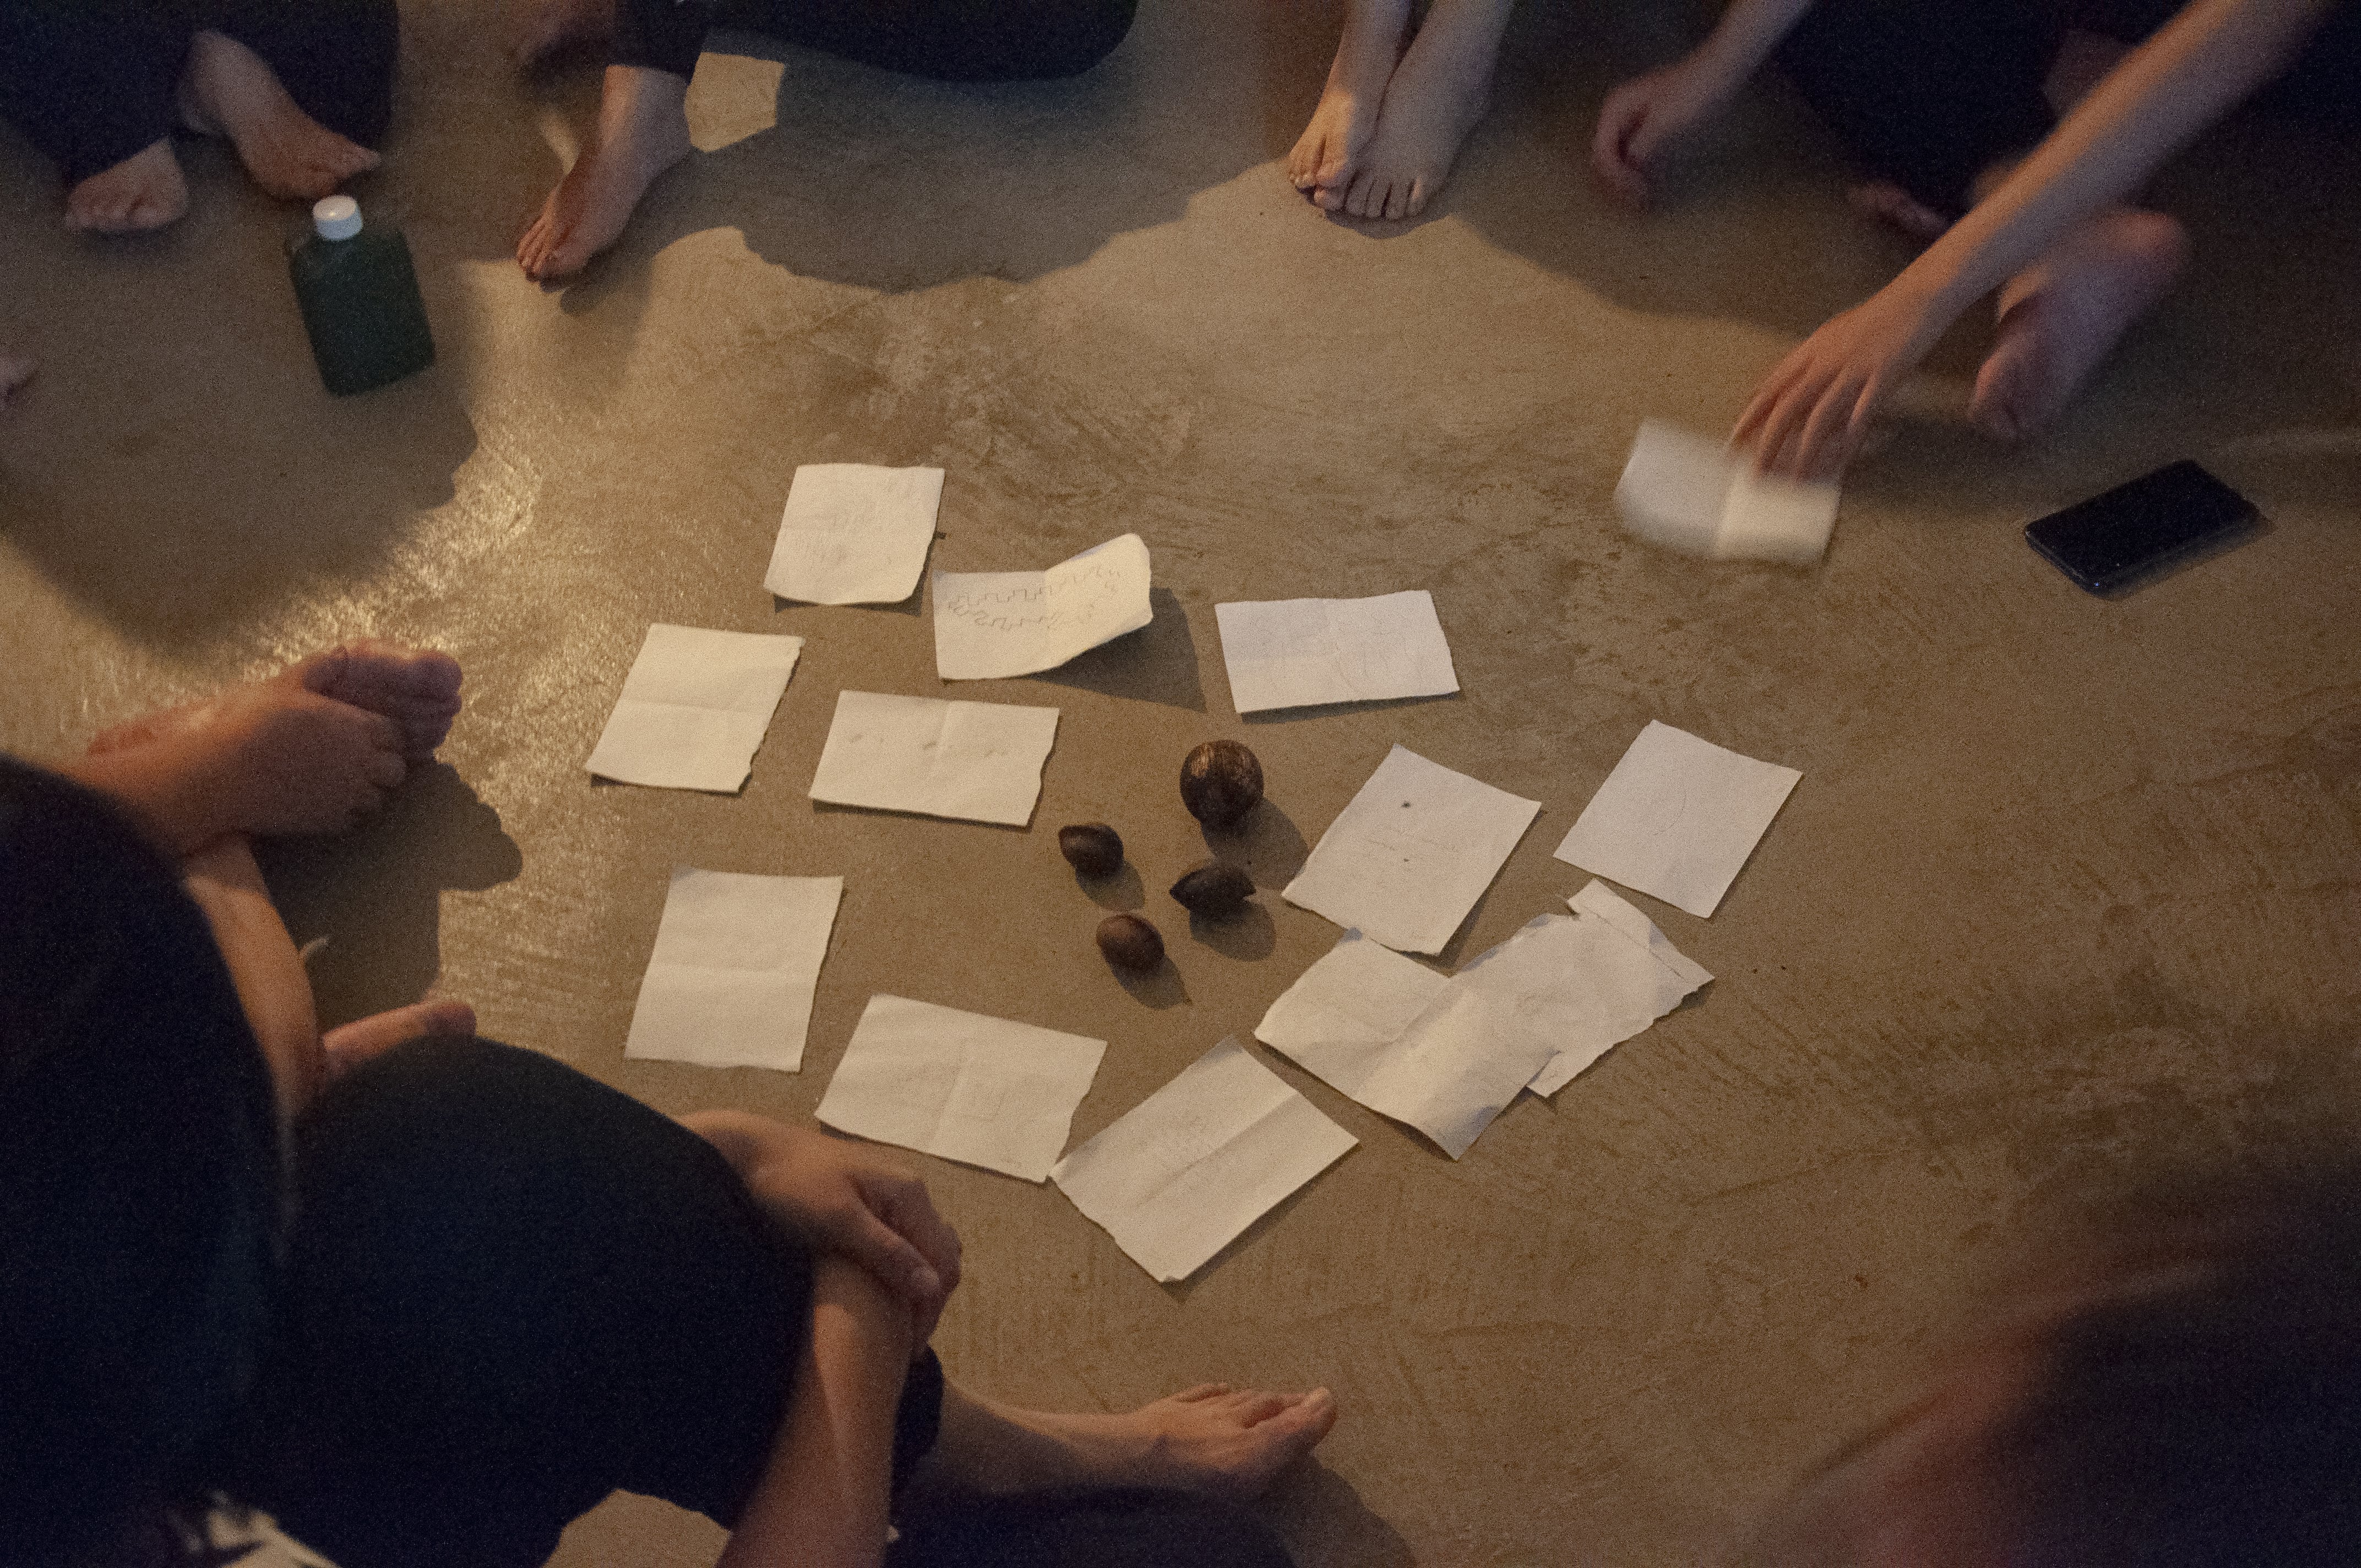 Assembly of Disquiet, supported by Rooftop Institute. Photo by Tse Chun Sing.